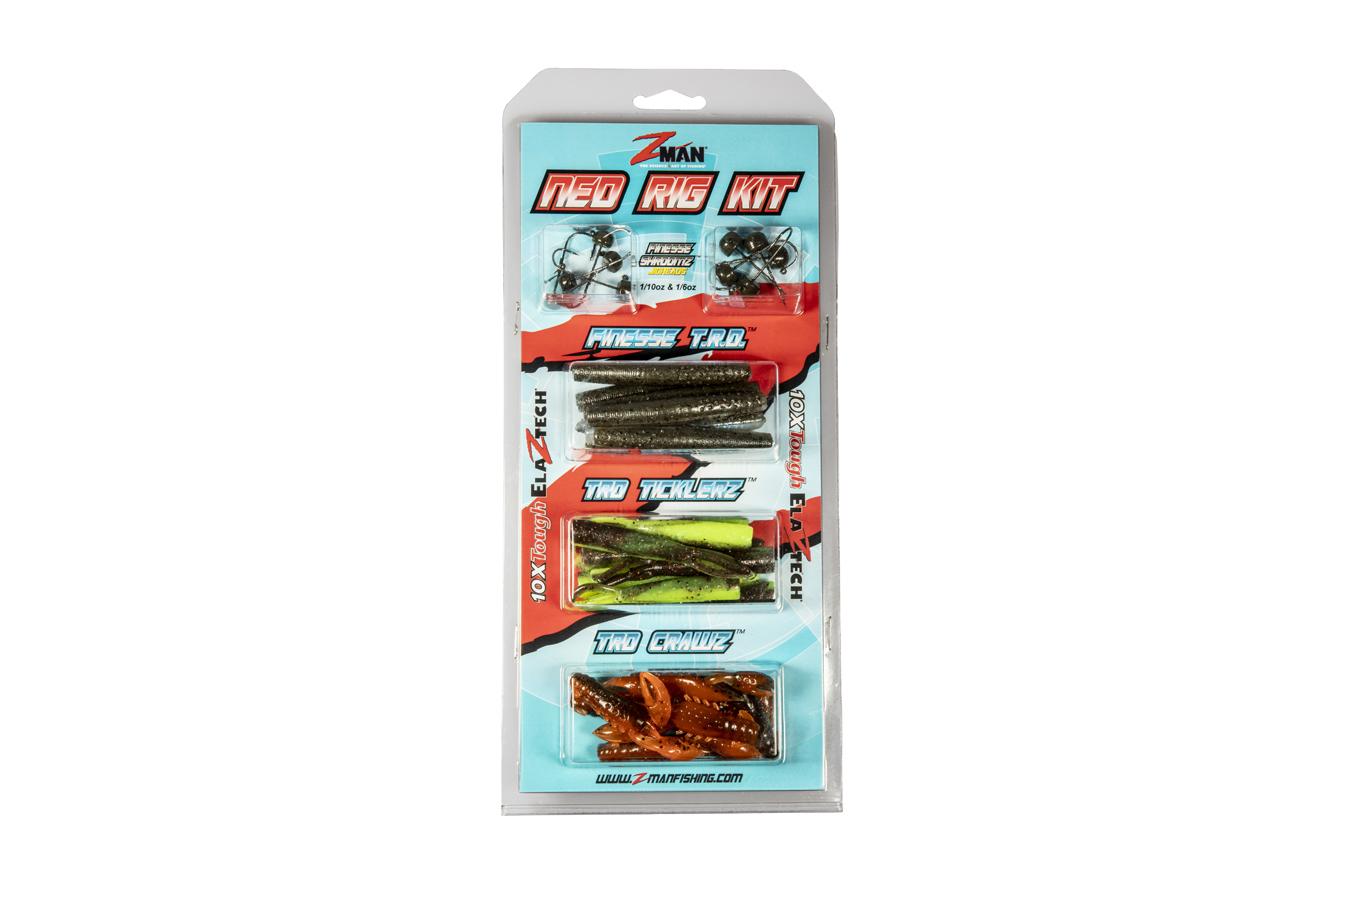 Discount Z Man Fishing Products Ned Rig Kit - Hot for Sale